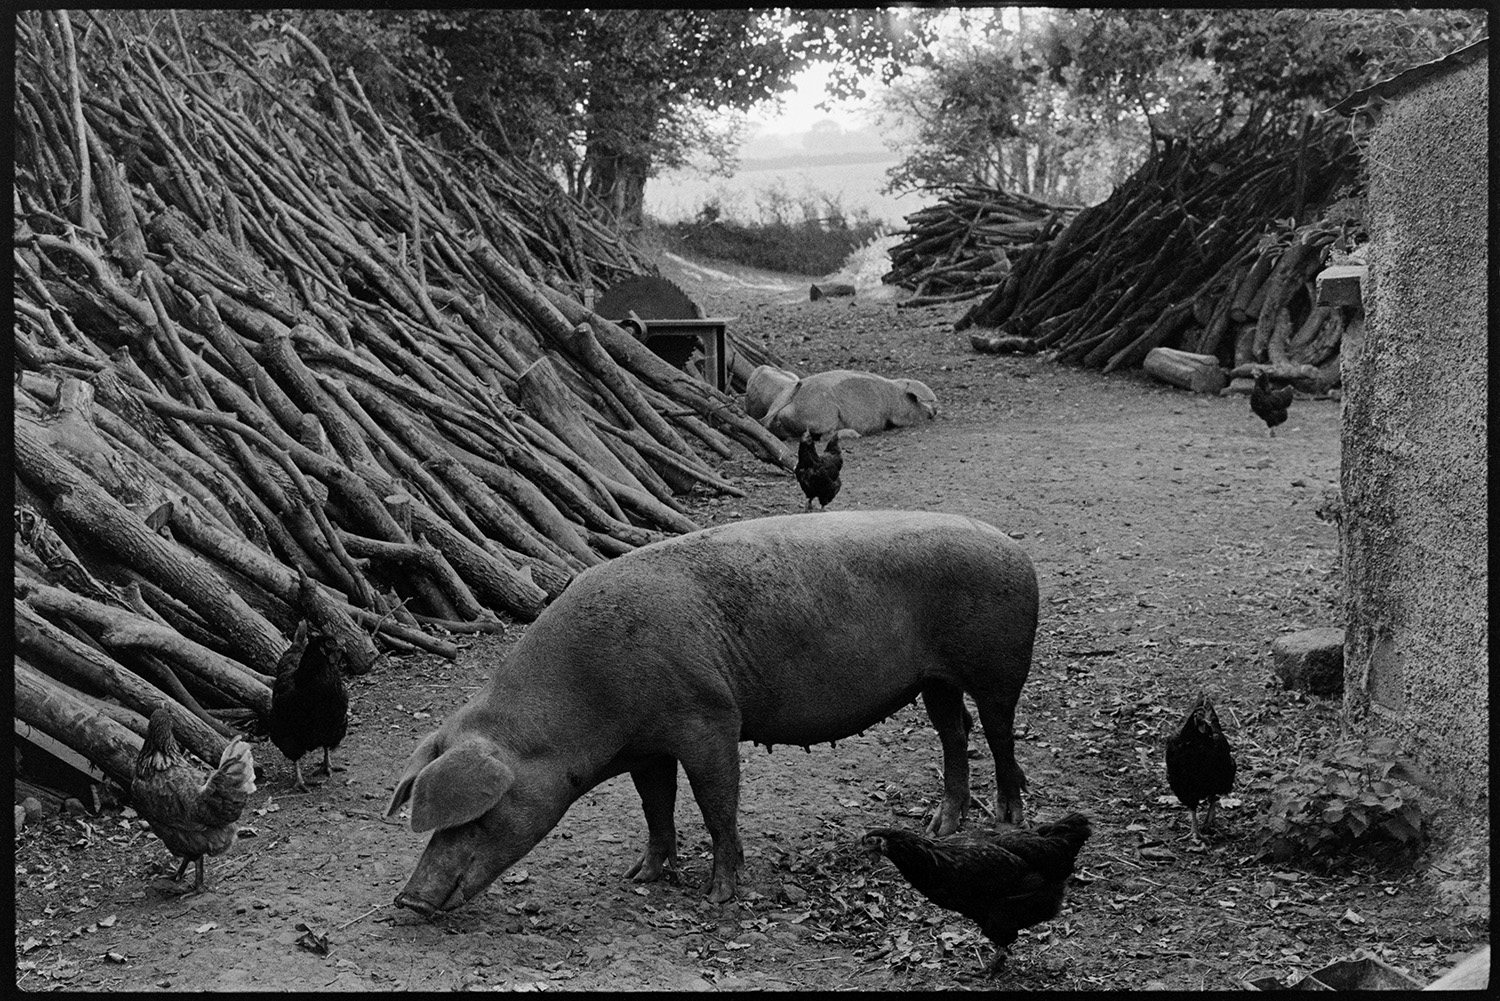 Pigs in farmyard. 
[Pigs and chickens in a farm track at Parsonage, Iddesleigh. Woodpiles can be seen on either side of the track , as well as a circular saw.]